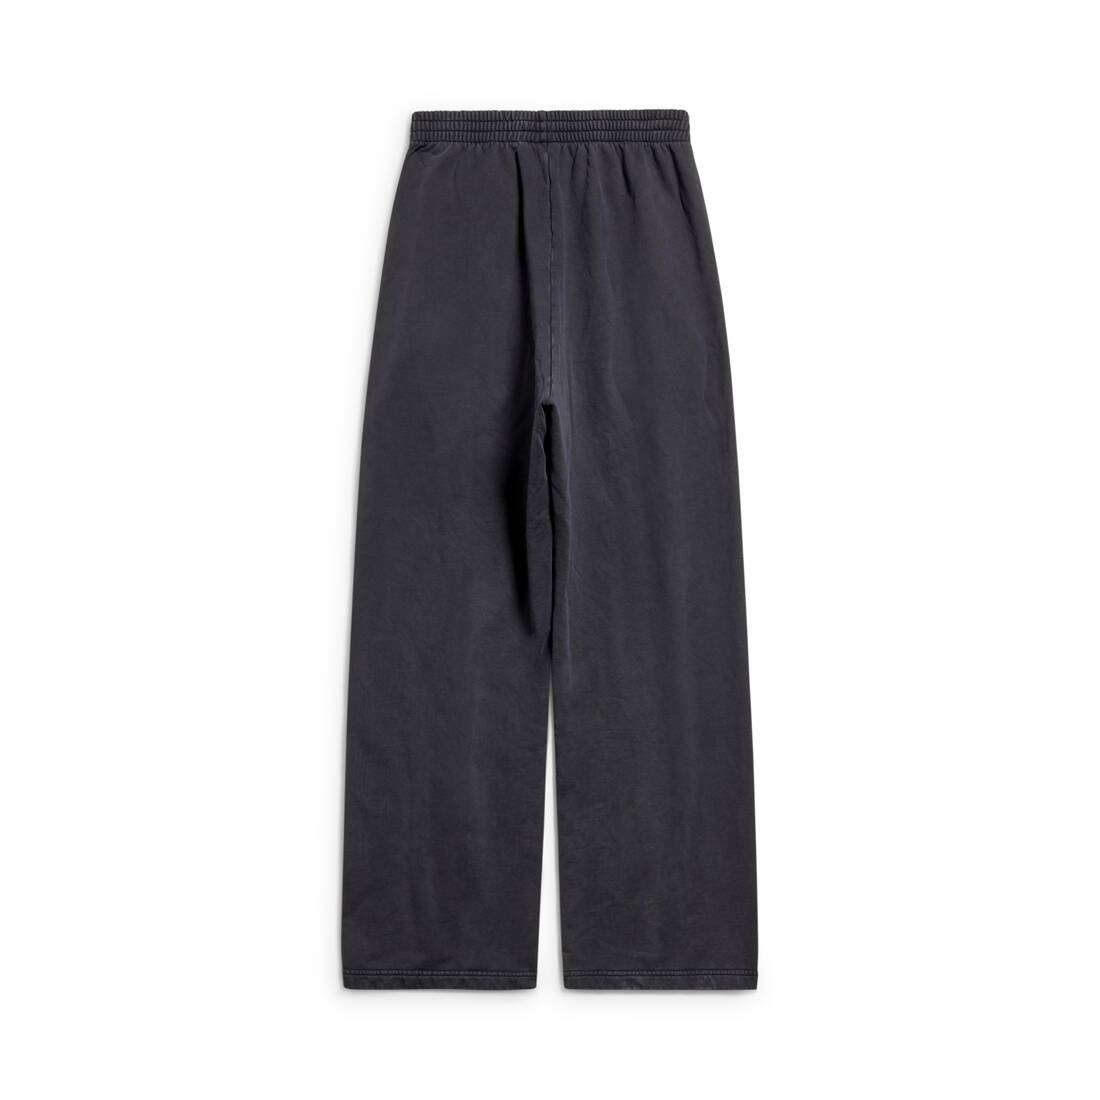 Outline Baggy Sweatpants in Black Faded - 2